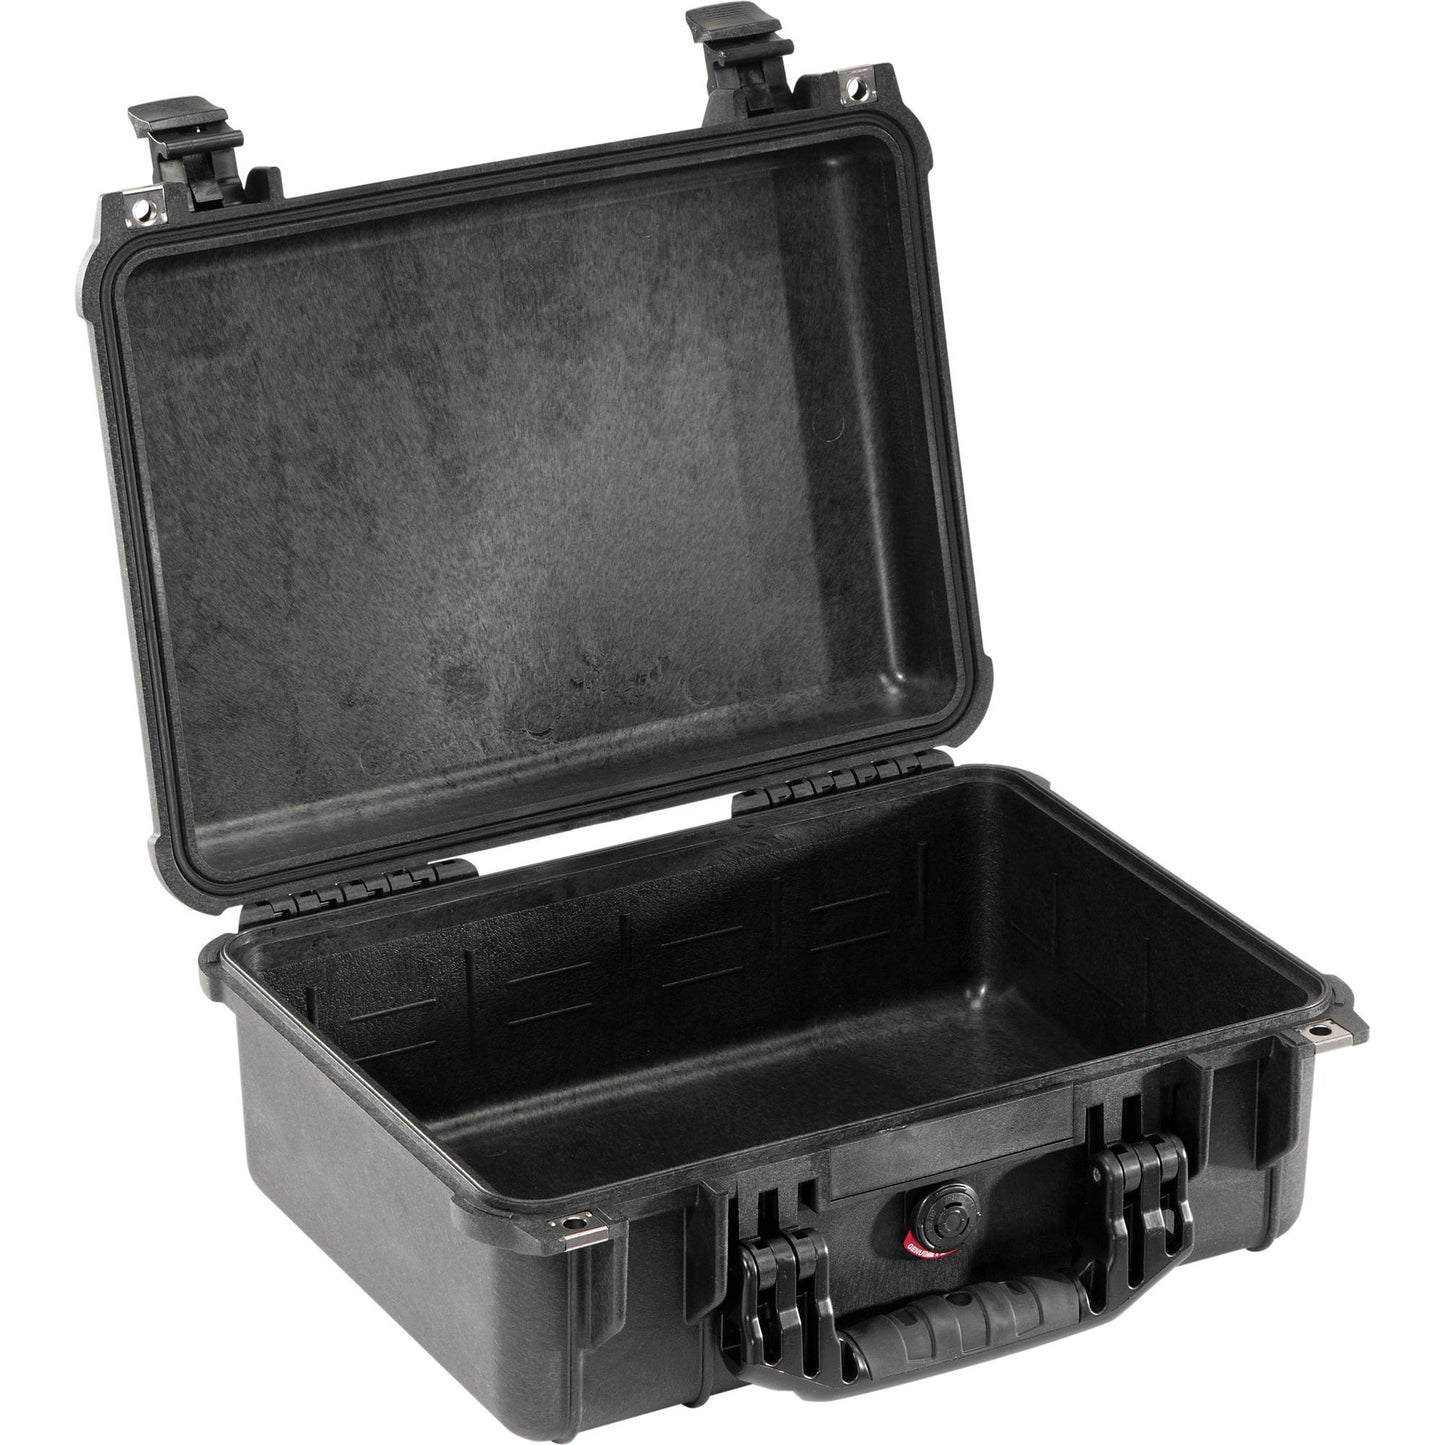 Pelican 1450 Protector Case Watertight Crushproof Dustproof Hard Casing with Foam, Automatic Pressure Equalization Purge Valve, IP67 Rating